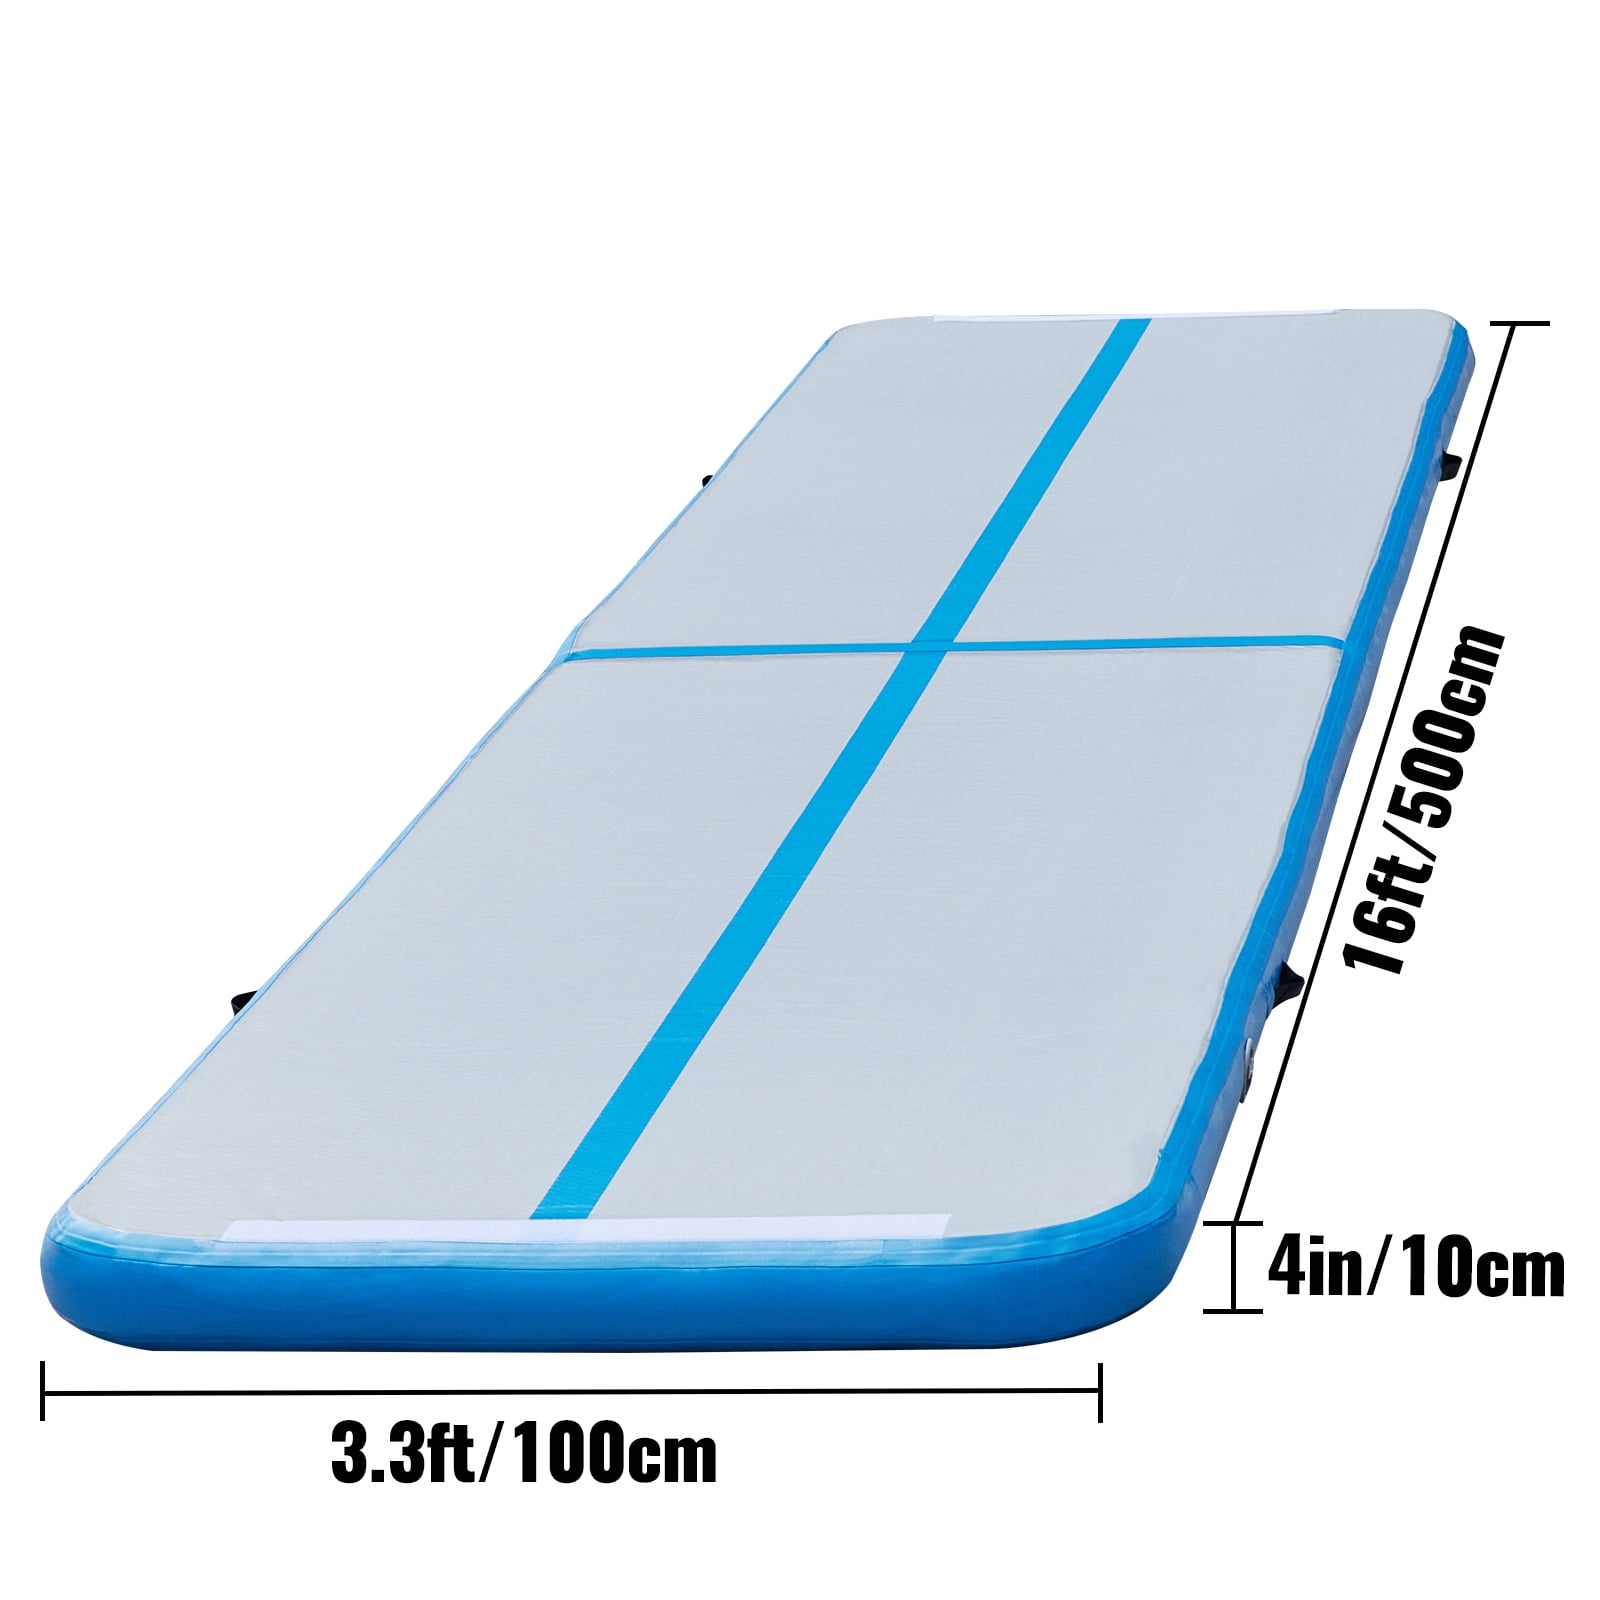 tellen Feodaal Dominant VEVOR Air Track, 16ft Inflatable Air Track Tumbling Mat with Electric Air  Pump, 4in Thickness Tumble Track Mats for Gymnastics/Cheerleading/Yoga/Home  Use, Blue&White - Walmart.com